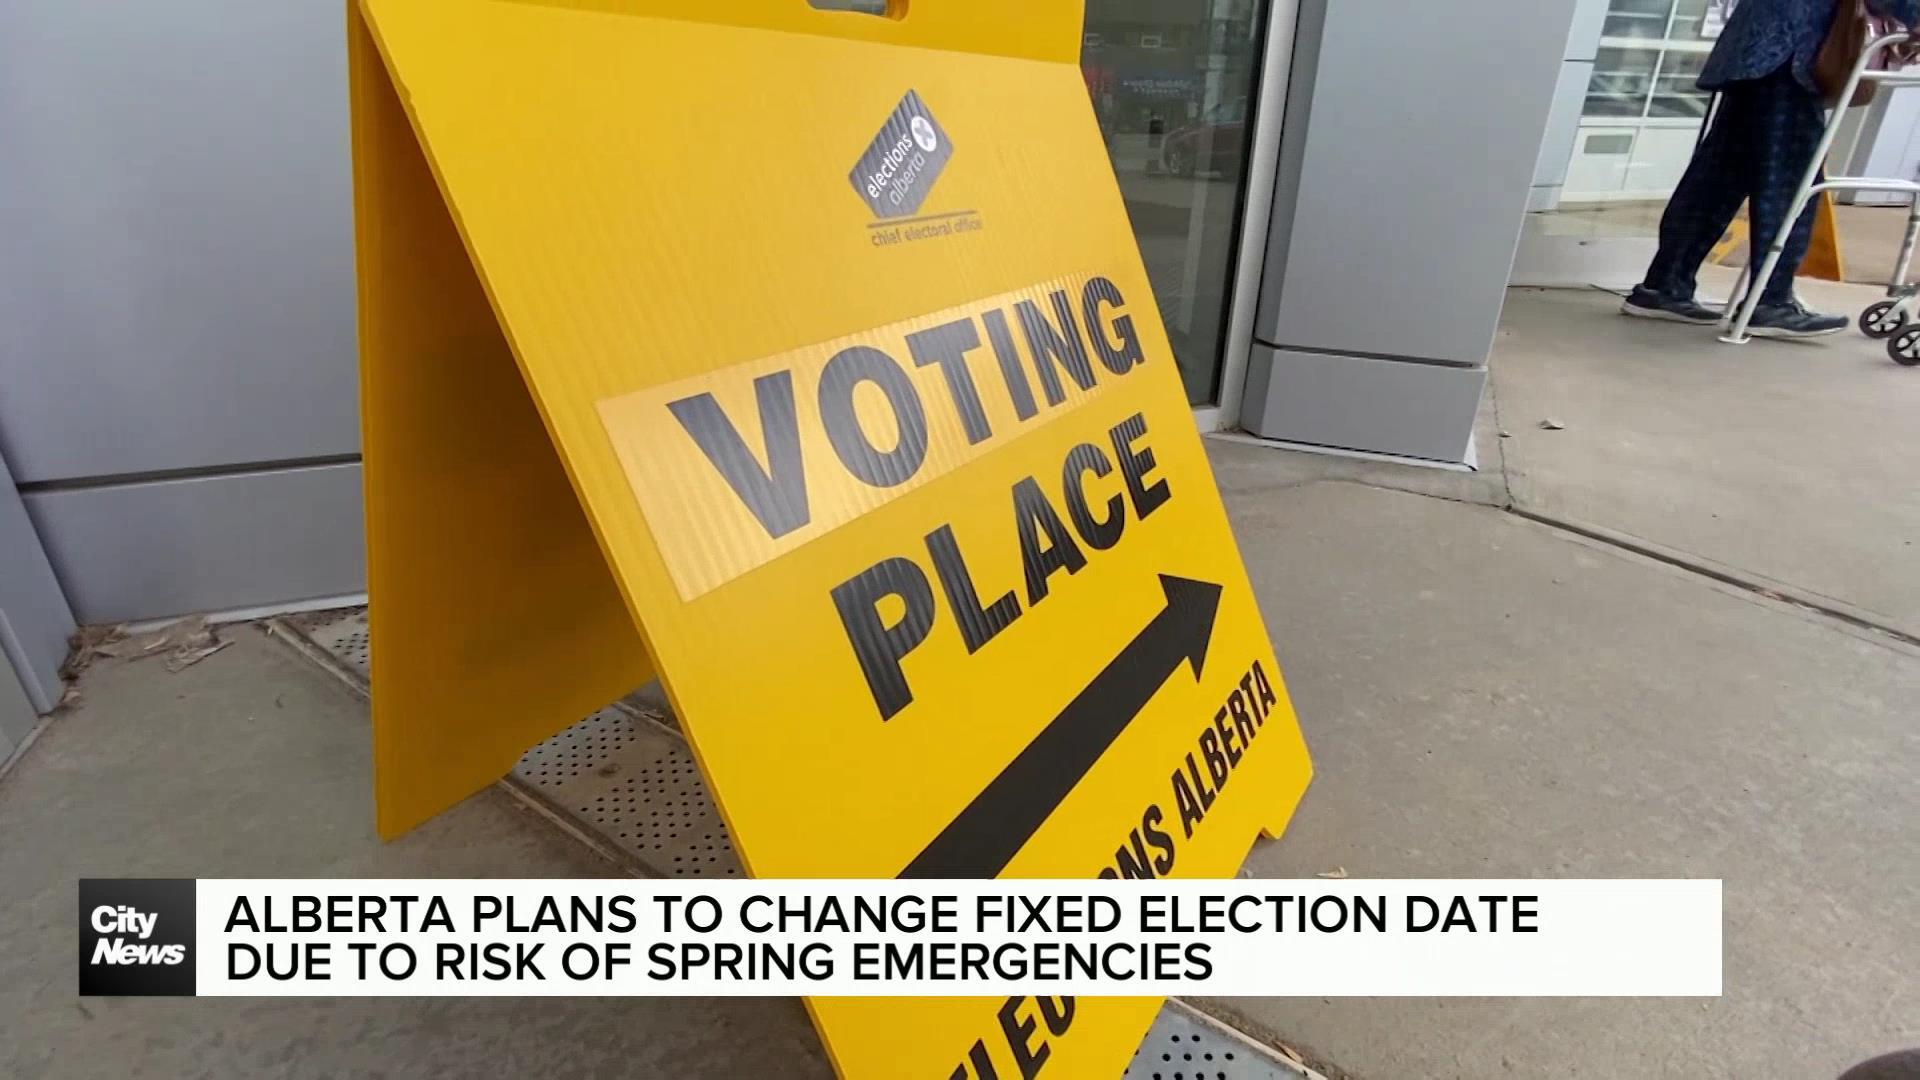 Alberta plans to change fixed election date due to risk of spring emergencies